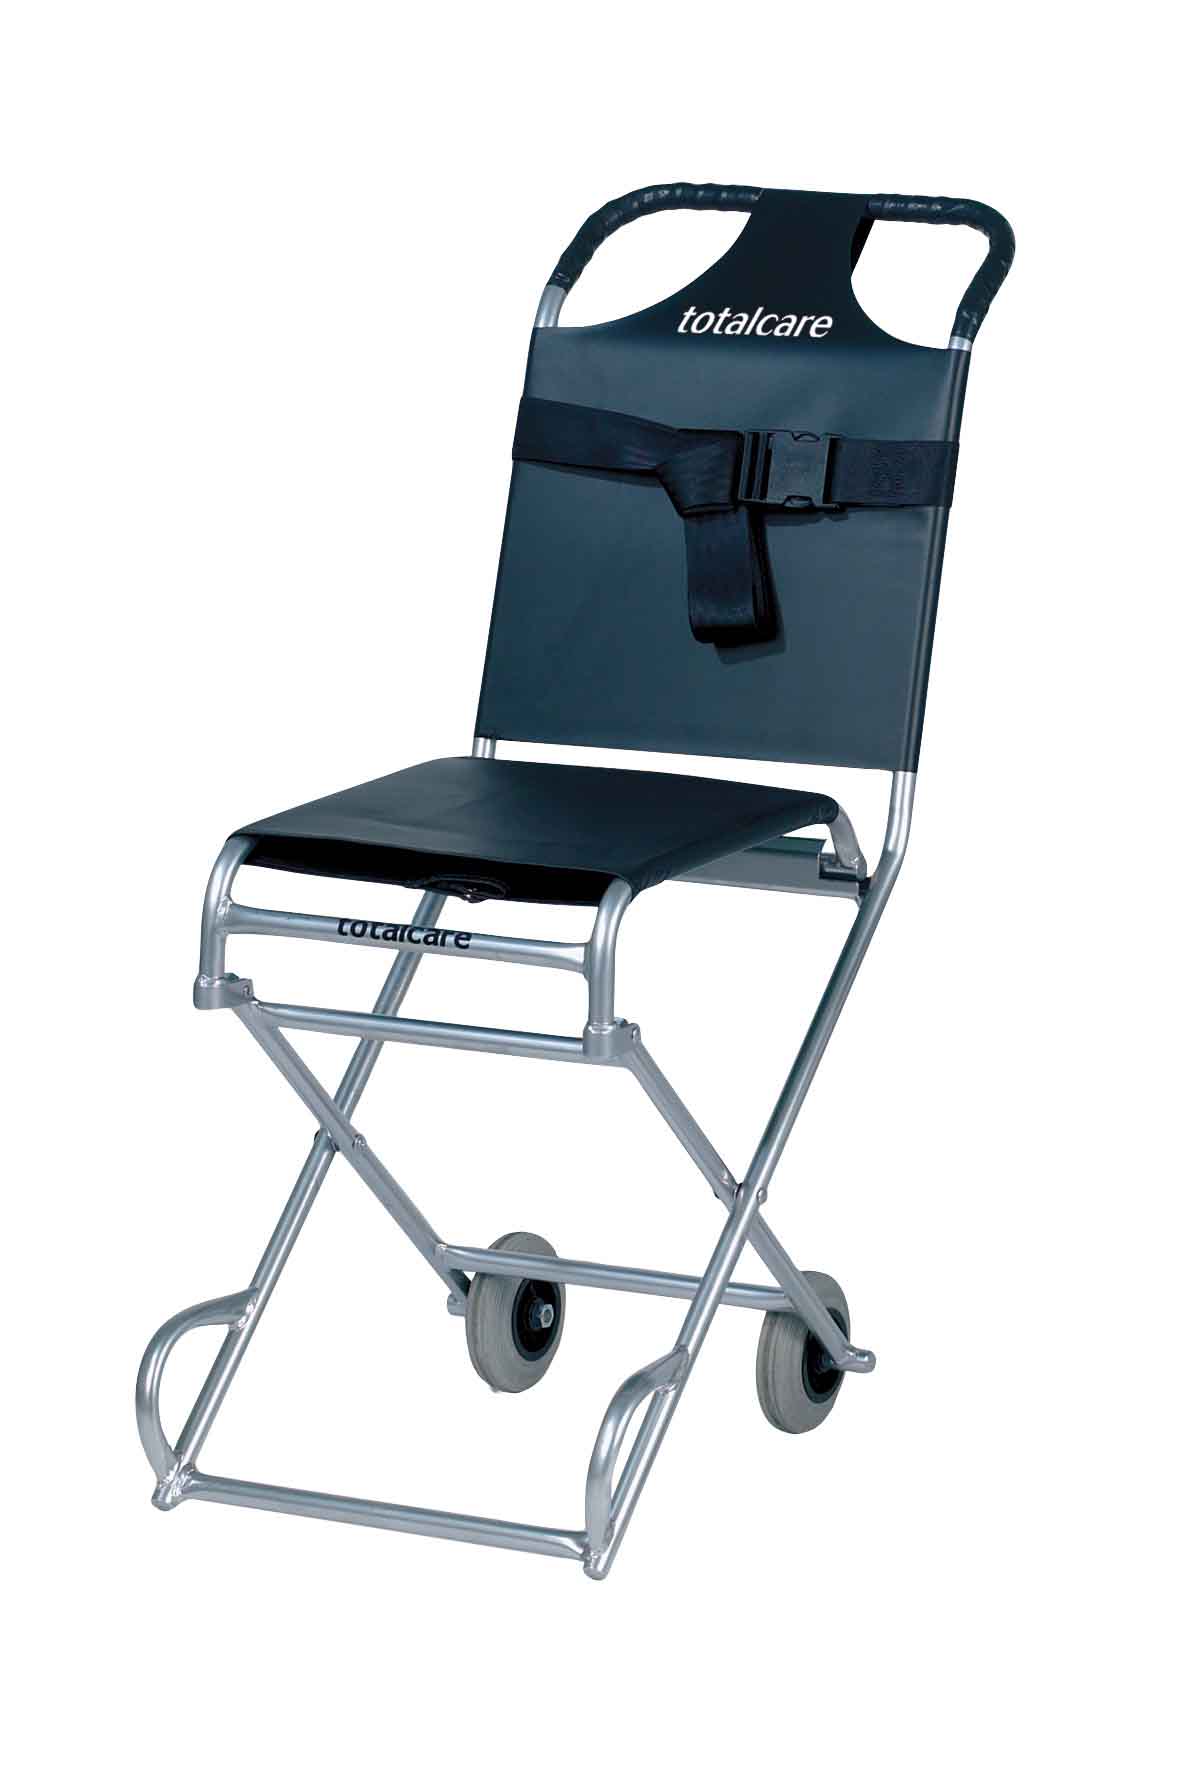 Mobi Evac Stair Chair Pics : Mobi Ez Battery Powered Stair Chair Stretcher - Evac is a universal evacuation chair for smooth stairway ascent or descent during an emergency without the need for physical strength or lifting.